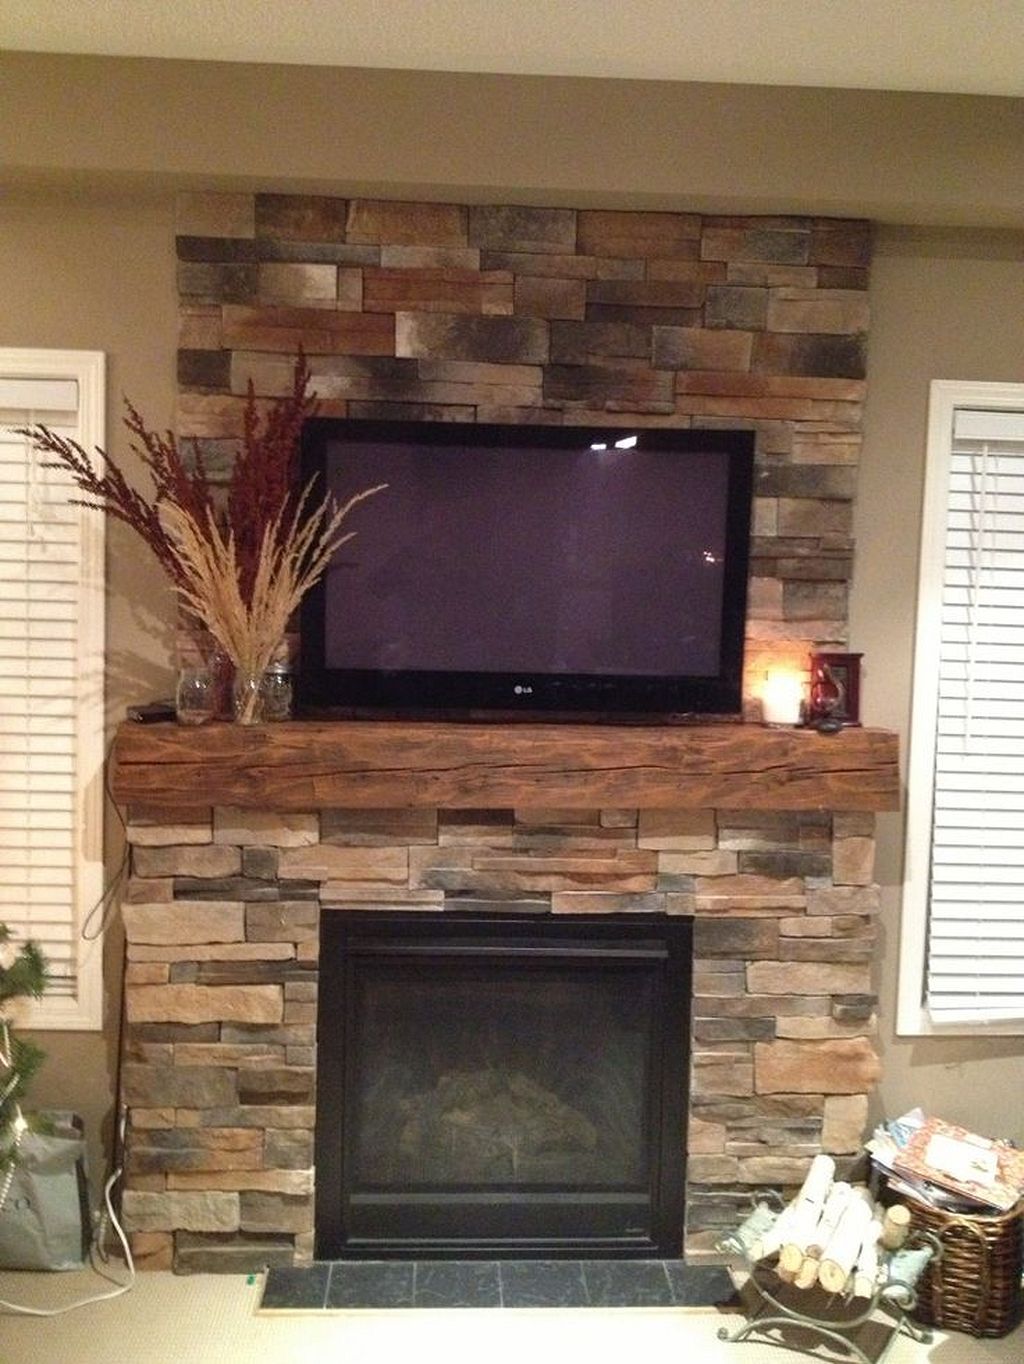 Barn Door Fireplace Awesome Pin by Tsr Services Barn Doors On Interior Barn Doors